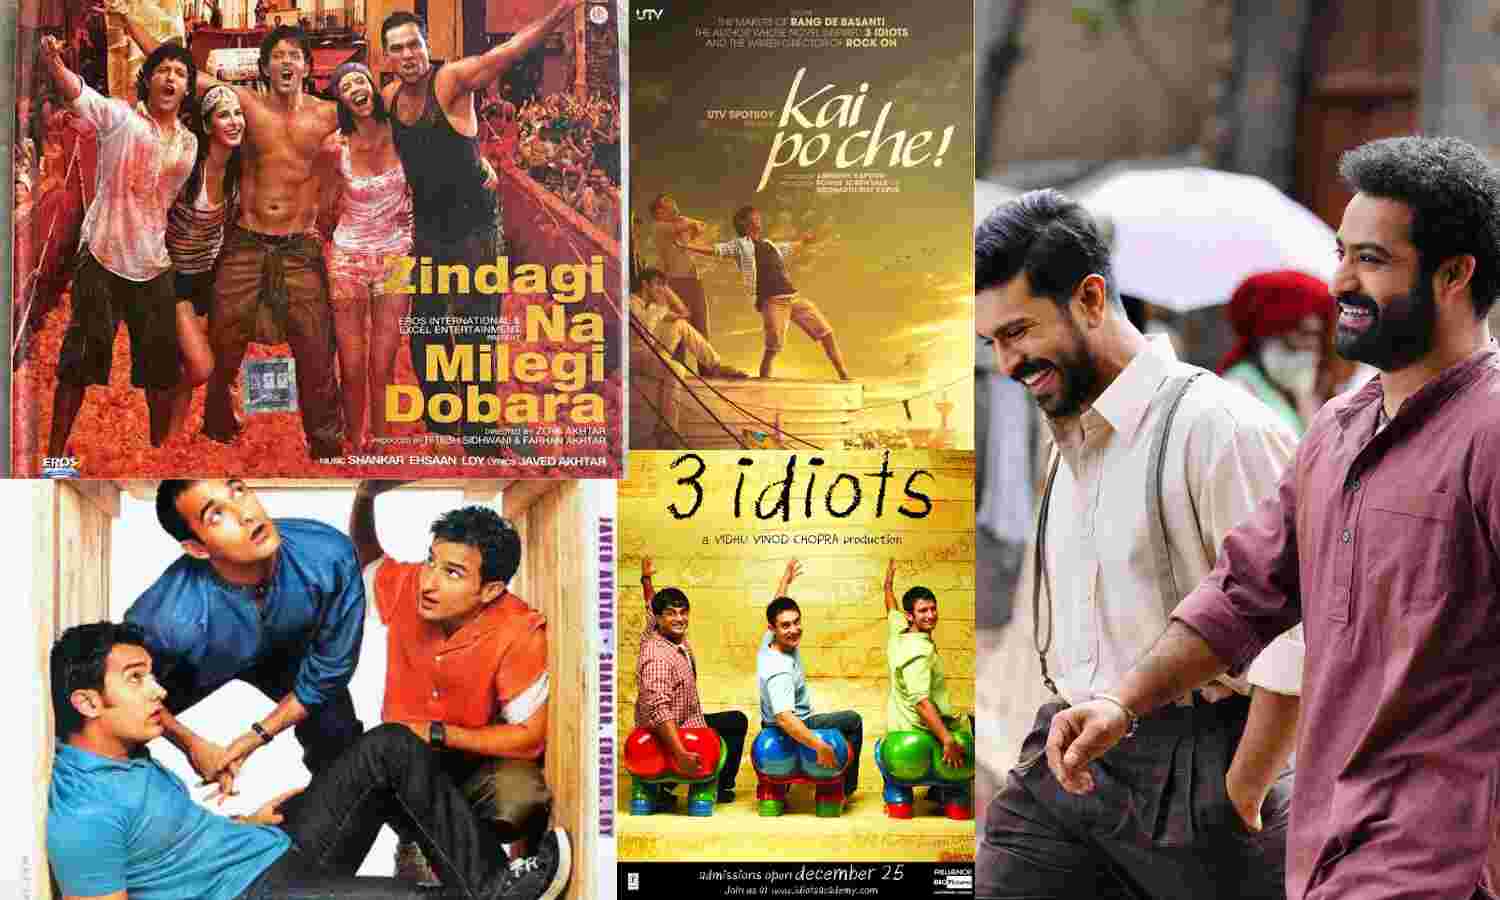 Bollywood Movies: These movies, which can be seen in the color of friendship, this weekend